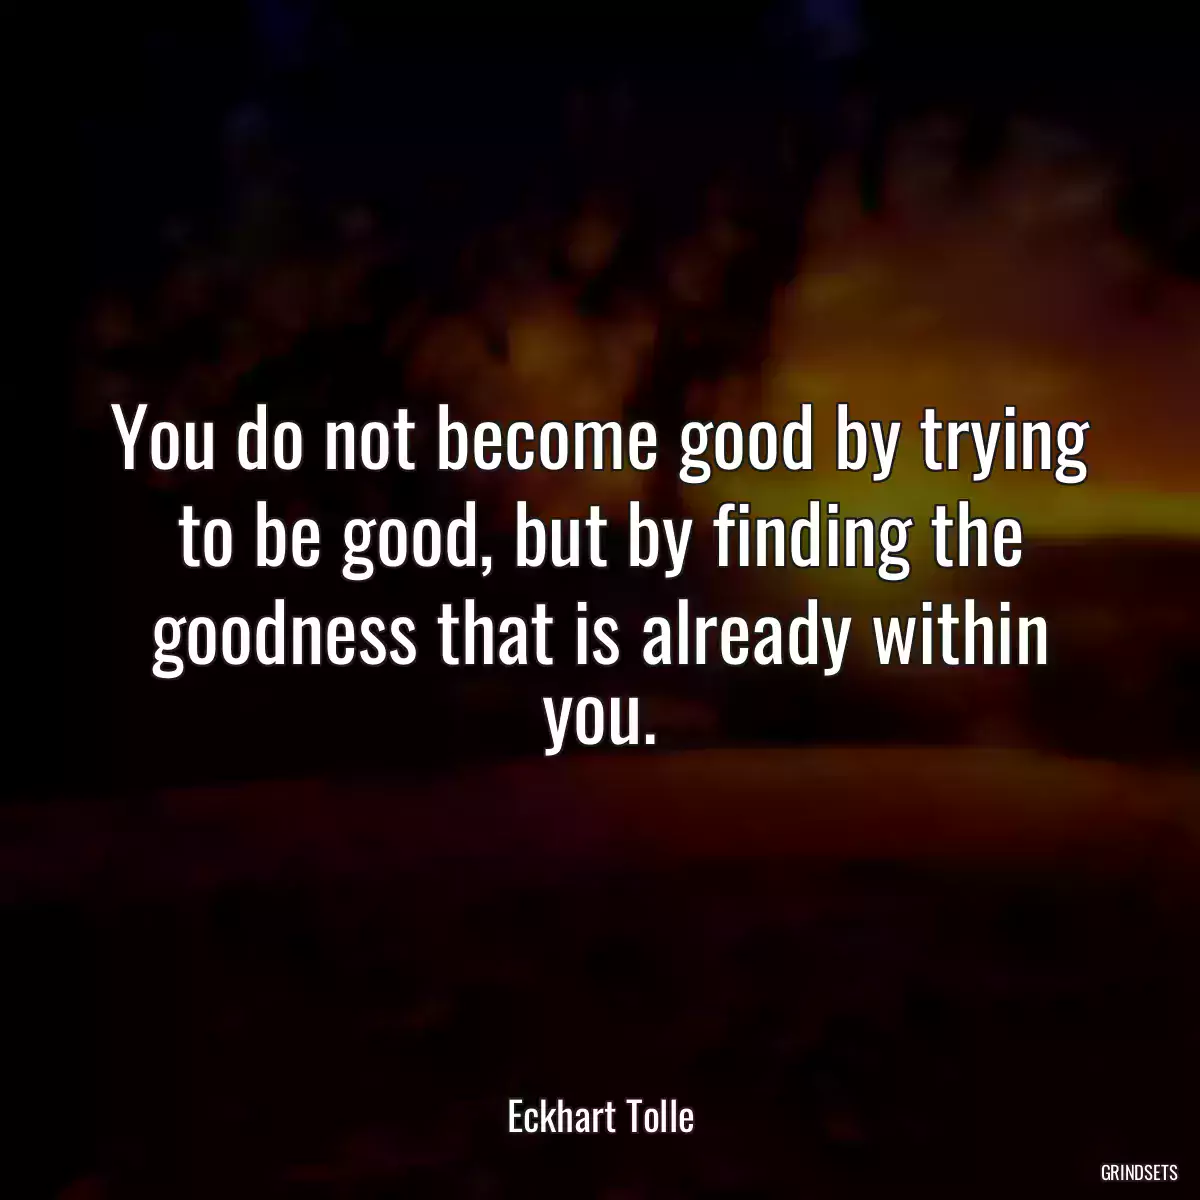 You do not become good by trying to be good, but by finding the goodness that is already within you.